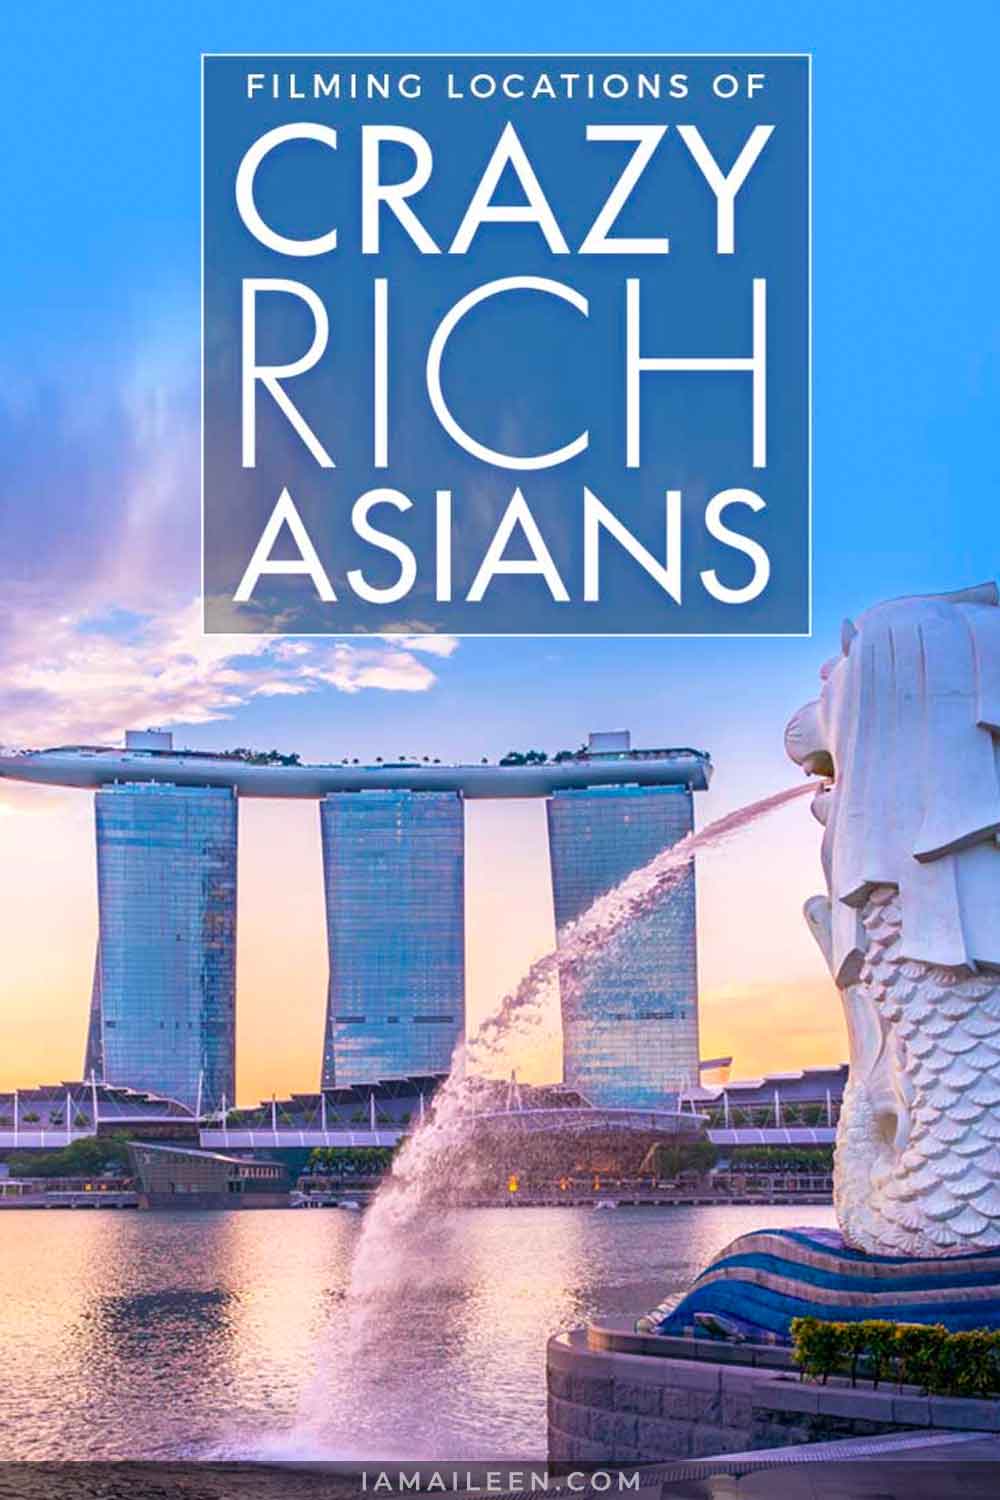 Top 10 Instagrammable Film Locations on 'Crazy Rich Asians' in Singapore